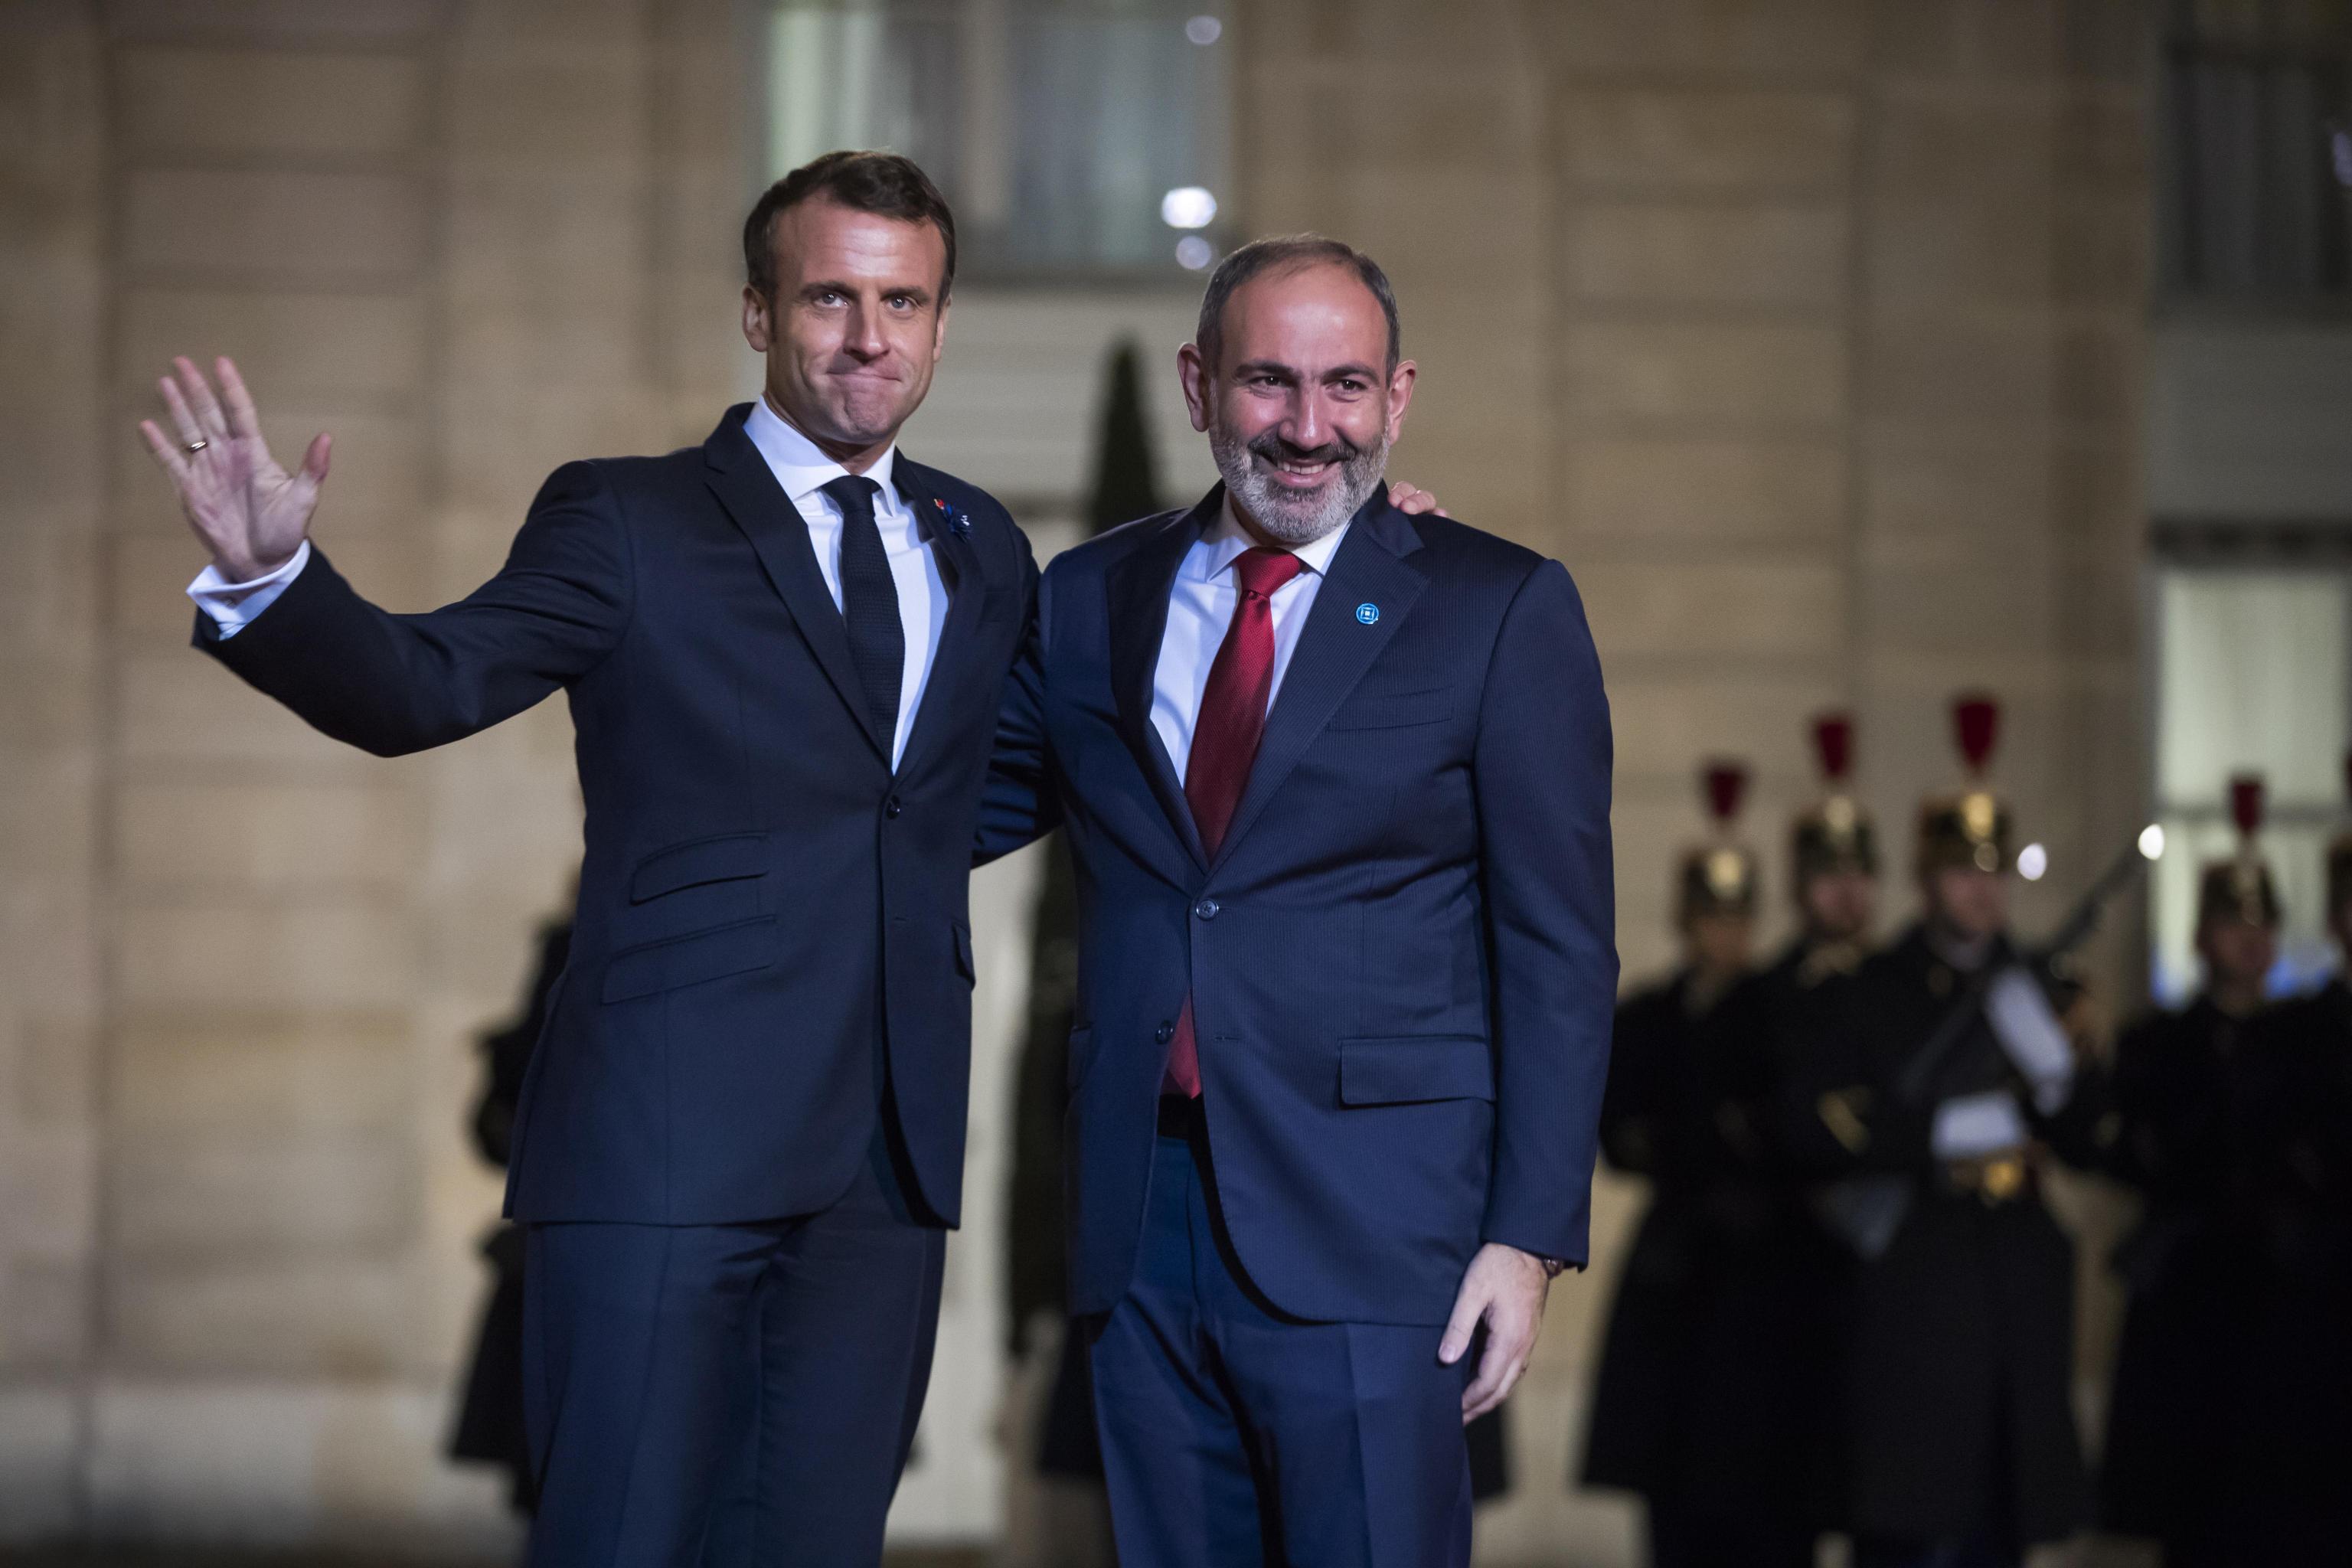 epa07989398 French President Emmanuel Macron (L) welcomes Armenian Prime Minister Nikol Pashinyan (R)  for a dinner held with participants of the Paris Peace Forum, at the Elysee Palace, in Paris, France, 11 November 2019.  EPA/CHRISTOPHE PETIT TESSON